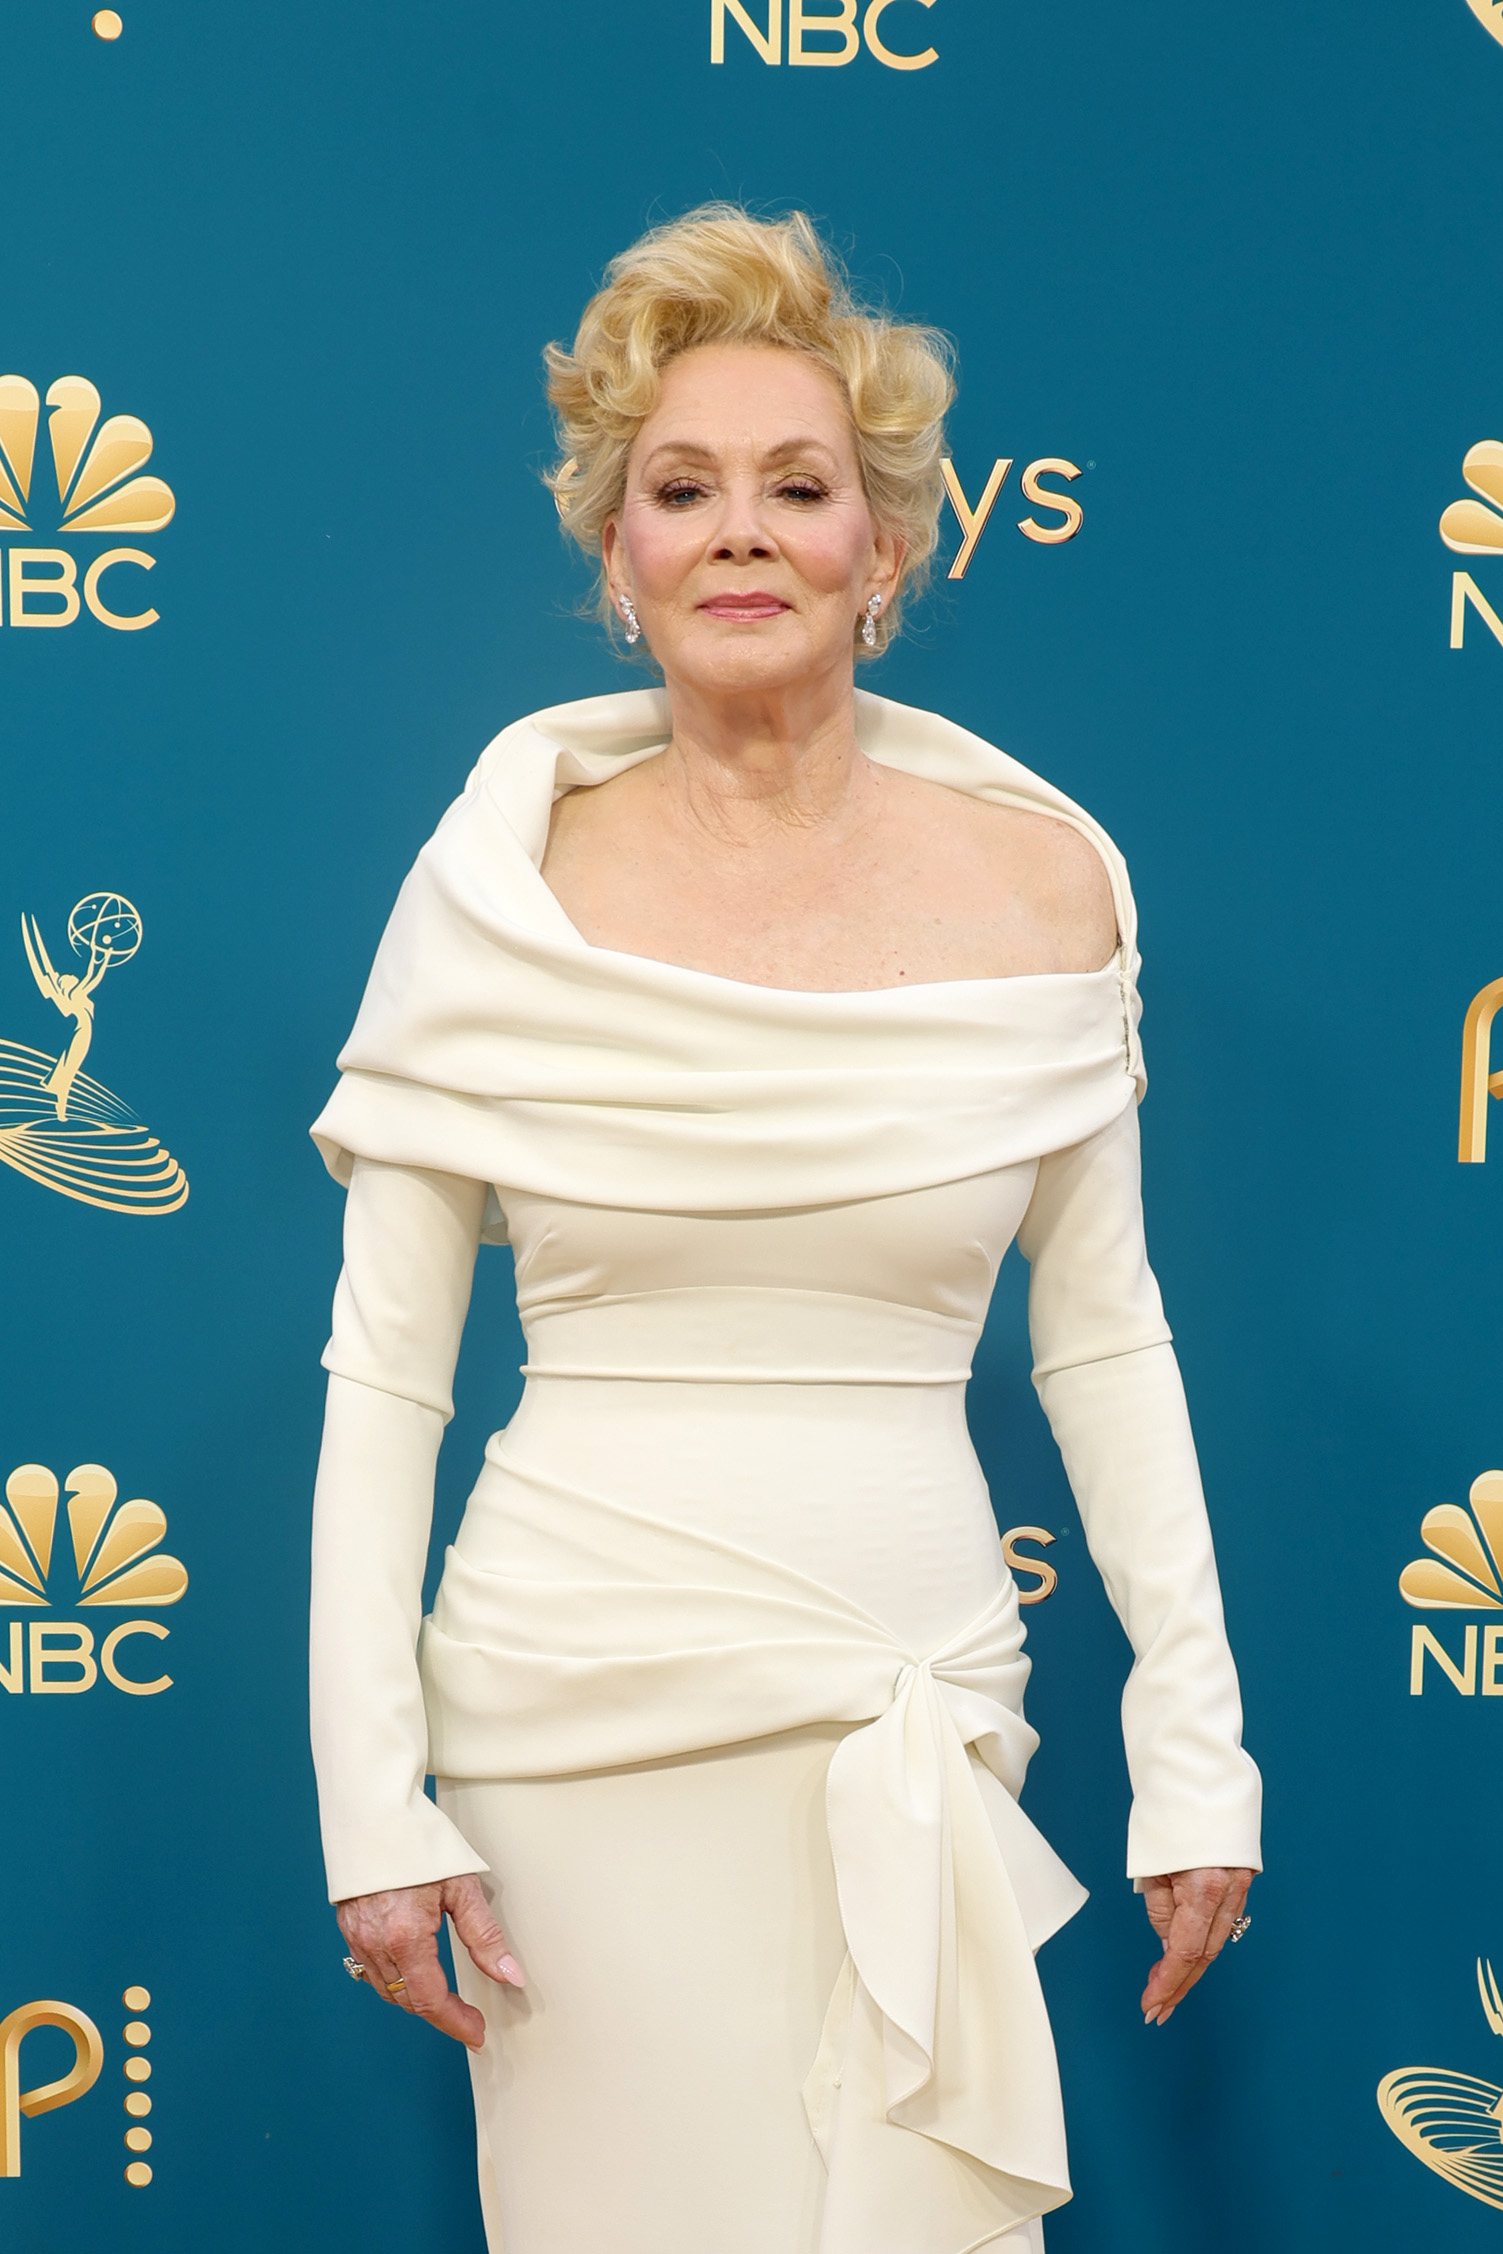 Red Carpet Dress Inspiration From the Emmys - Sydne Style